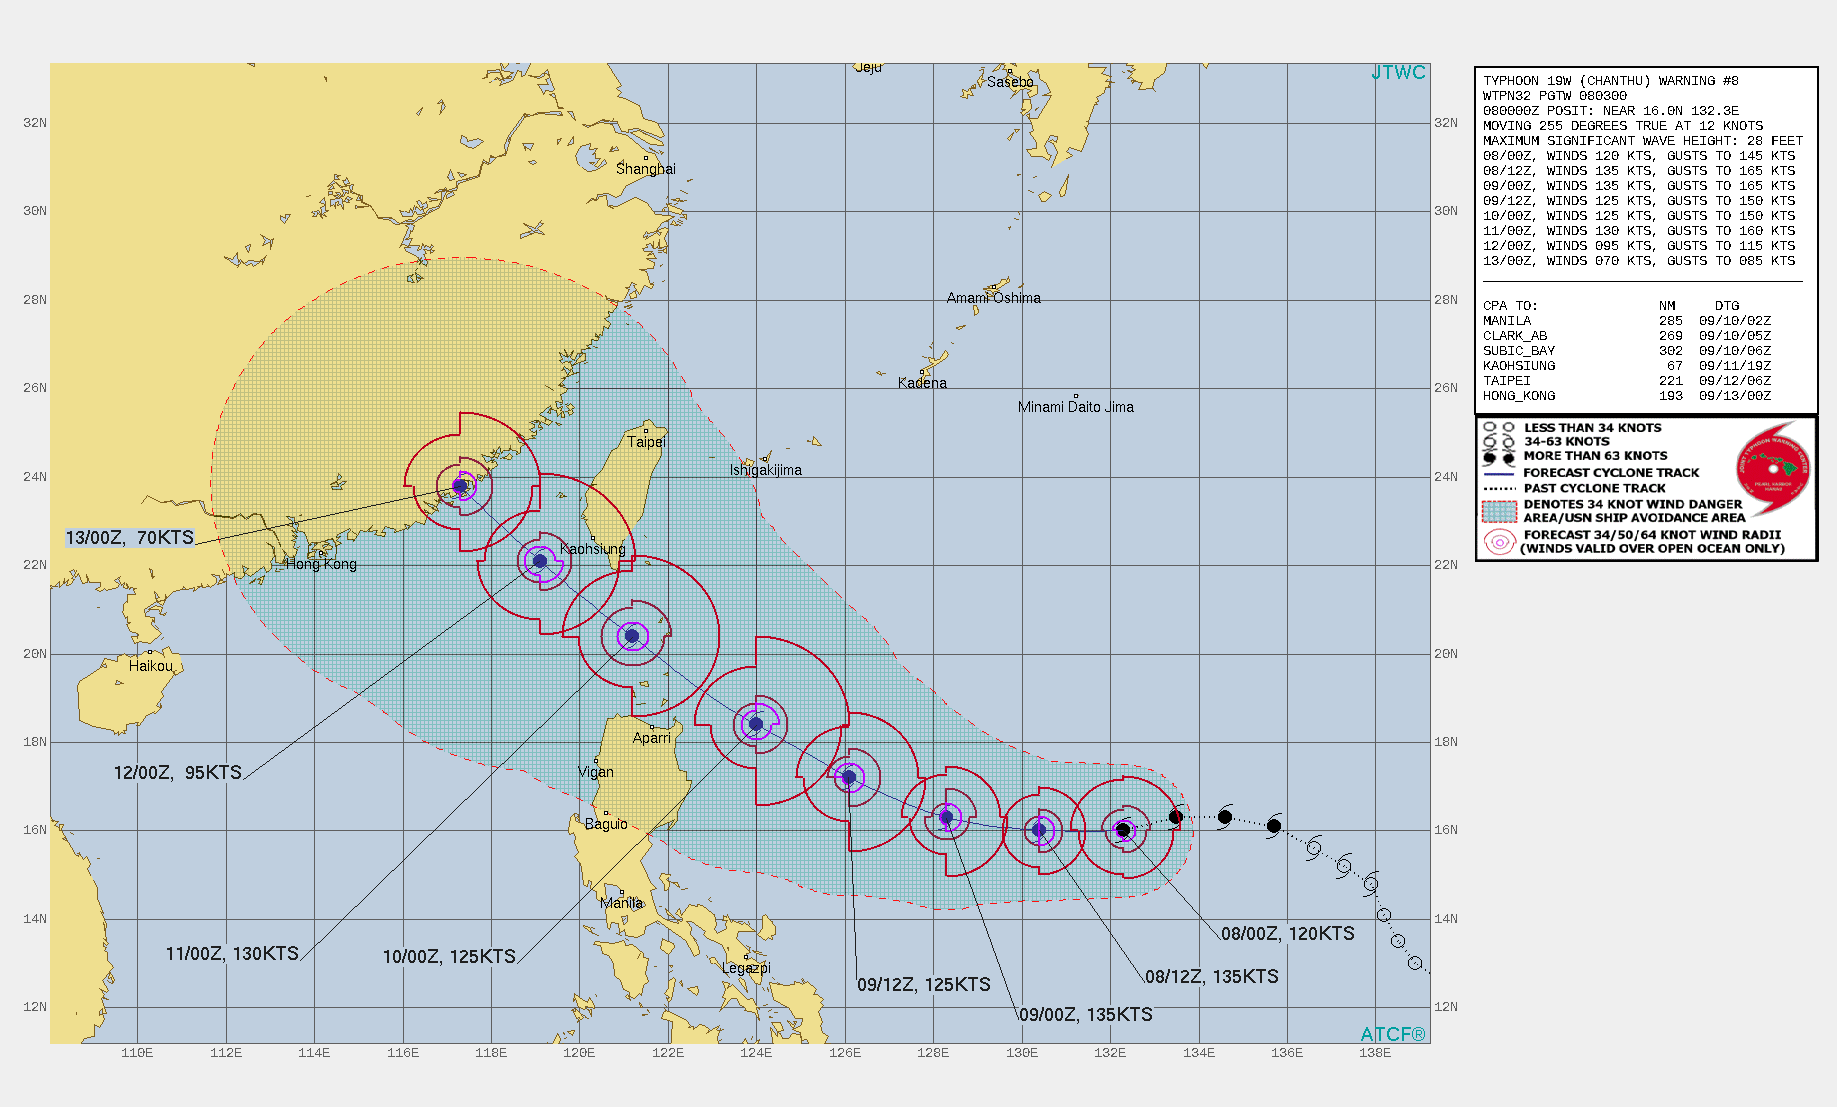 TY 19W(CHANTHU). WARNING 8 ISSUED AT 08/03UTC.SIGNIFICANT FORECAST CHANGES: THERE ARE NO SIGNIFICANT CHANGES TO THE FORECAST FROM THE PREVIOUS WARNING.  FORECAST DISCUSSION: TY 19W IS FORECAST TO TRACK GENERALLY WESTWARD TO WEST-NORTHWESTWARD THROUGH 48H UNDER THE STEERING INFLUENCE OF THE DEEP-LAYERED SUBTROPICAL RIDGE(STR) ENTRENCHED TO THE NORTH. TY 19W WILL INTENSIFY TO SUPERTYPHOON (STY) STRENGTH (PEAK 135 KNOTS/CAT 4) BY 12H AND WILL MAINTAIN STY INTENSITY THROUGH AT LEAST THE NEXT 24 HOURS WITH SOME POTENTIAL FOR AN EYEWALL REPLACEMENT CYCLE WHICH COULD PRODUCE SOMEWHAT ERRATIC INTENSITIES THROUGH 72H. AFTER 72H, THE SYSTEM SHOULD TURN NORTHWESTWARD ALONG THE SOUTHWEST PERIPHERY OF THE STR WHILE WEAKENING STEADILY DUE TO LAND INTERACTION. UPPER-LEVEL FLOW IS EXPECTED TO REMAIN ZONAL OVER THE EAST CHINA SEA WITH NO DEEP MIDLATITUDE SHORTWAVE TROUGHS EXPECTED TO WEAKEN THE SUBTROPICAL STEERING RIDGE THUS RECURVATURE IS ASSESSED AS UNLIKELY.